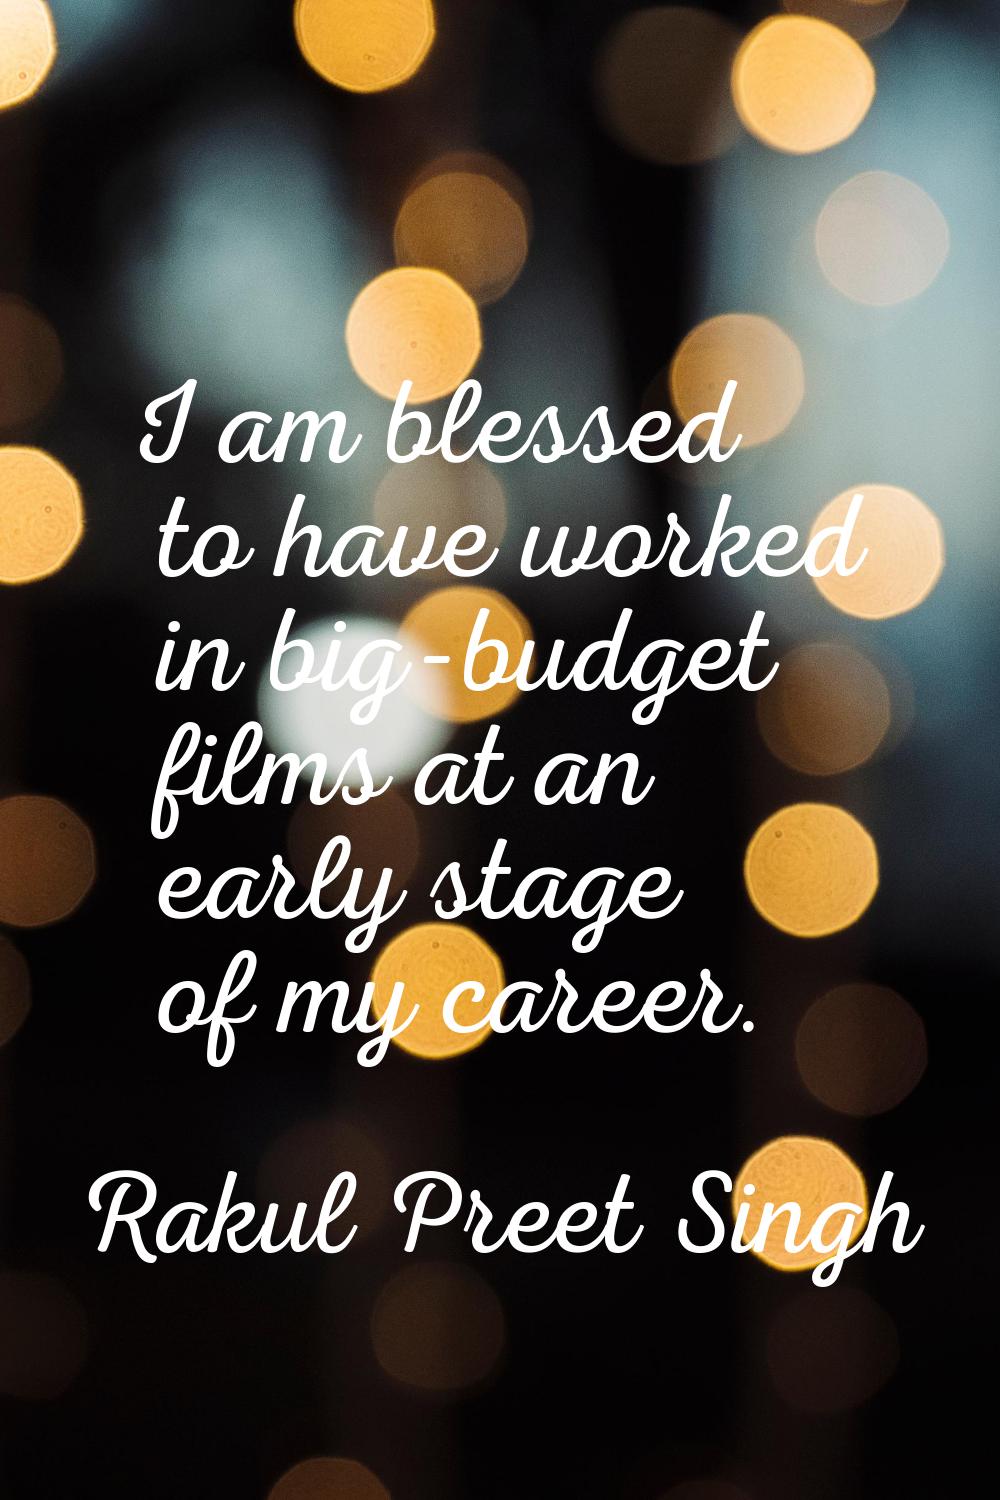 I am blessed to have worked in big-budget films at an early stage of my career.